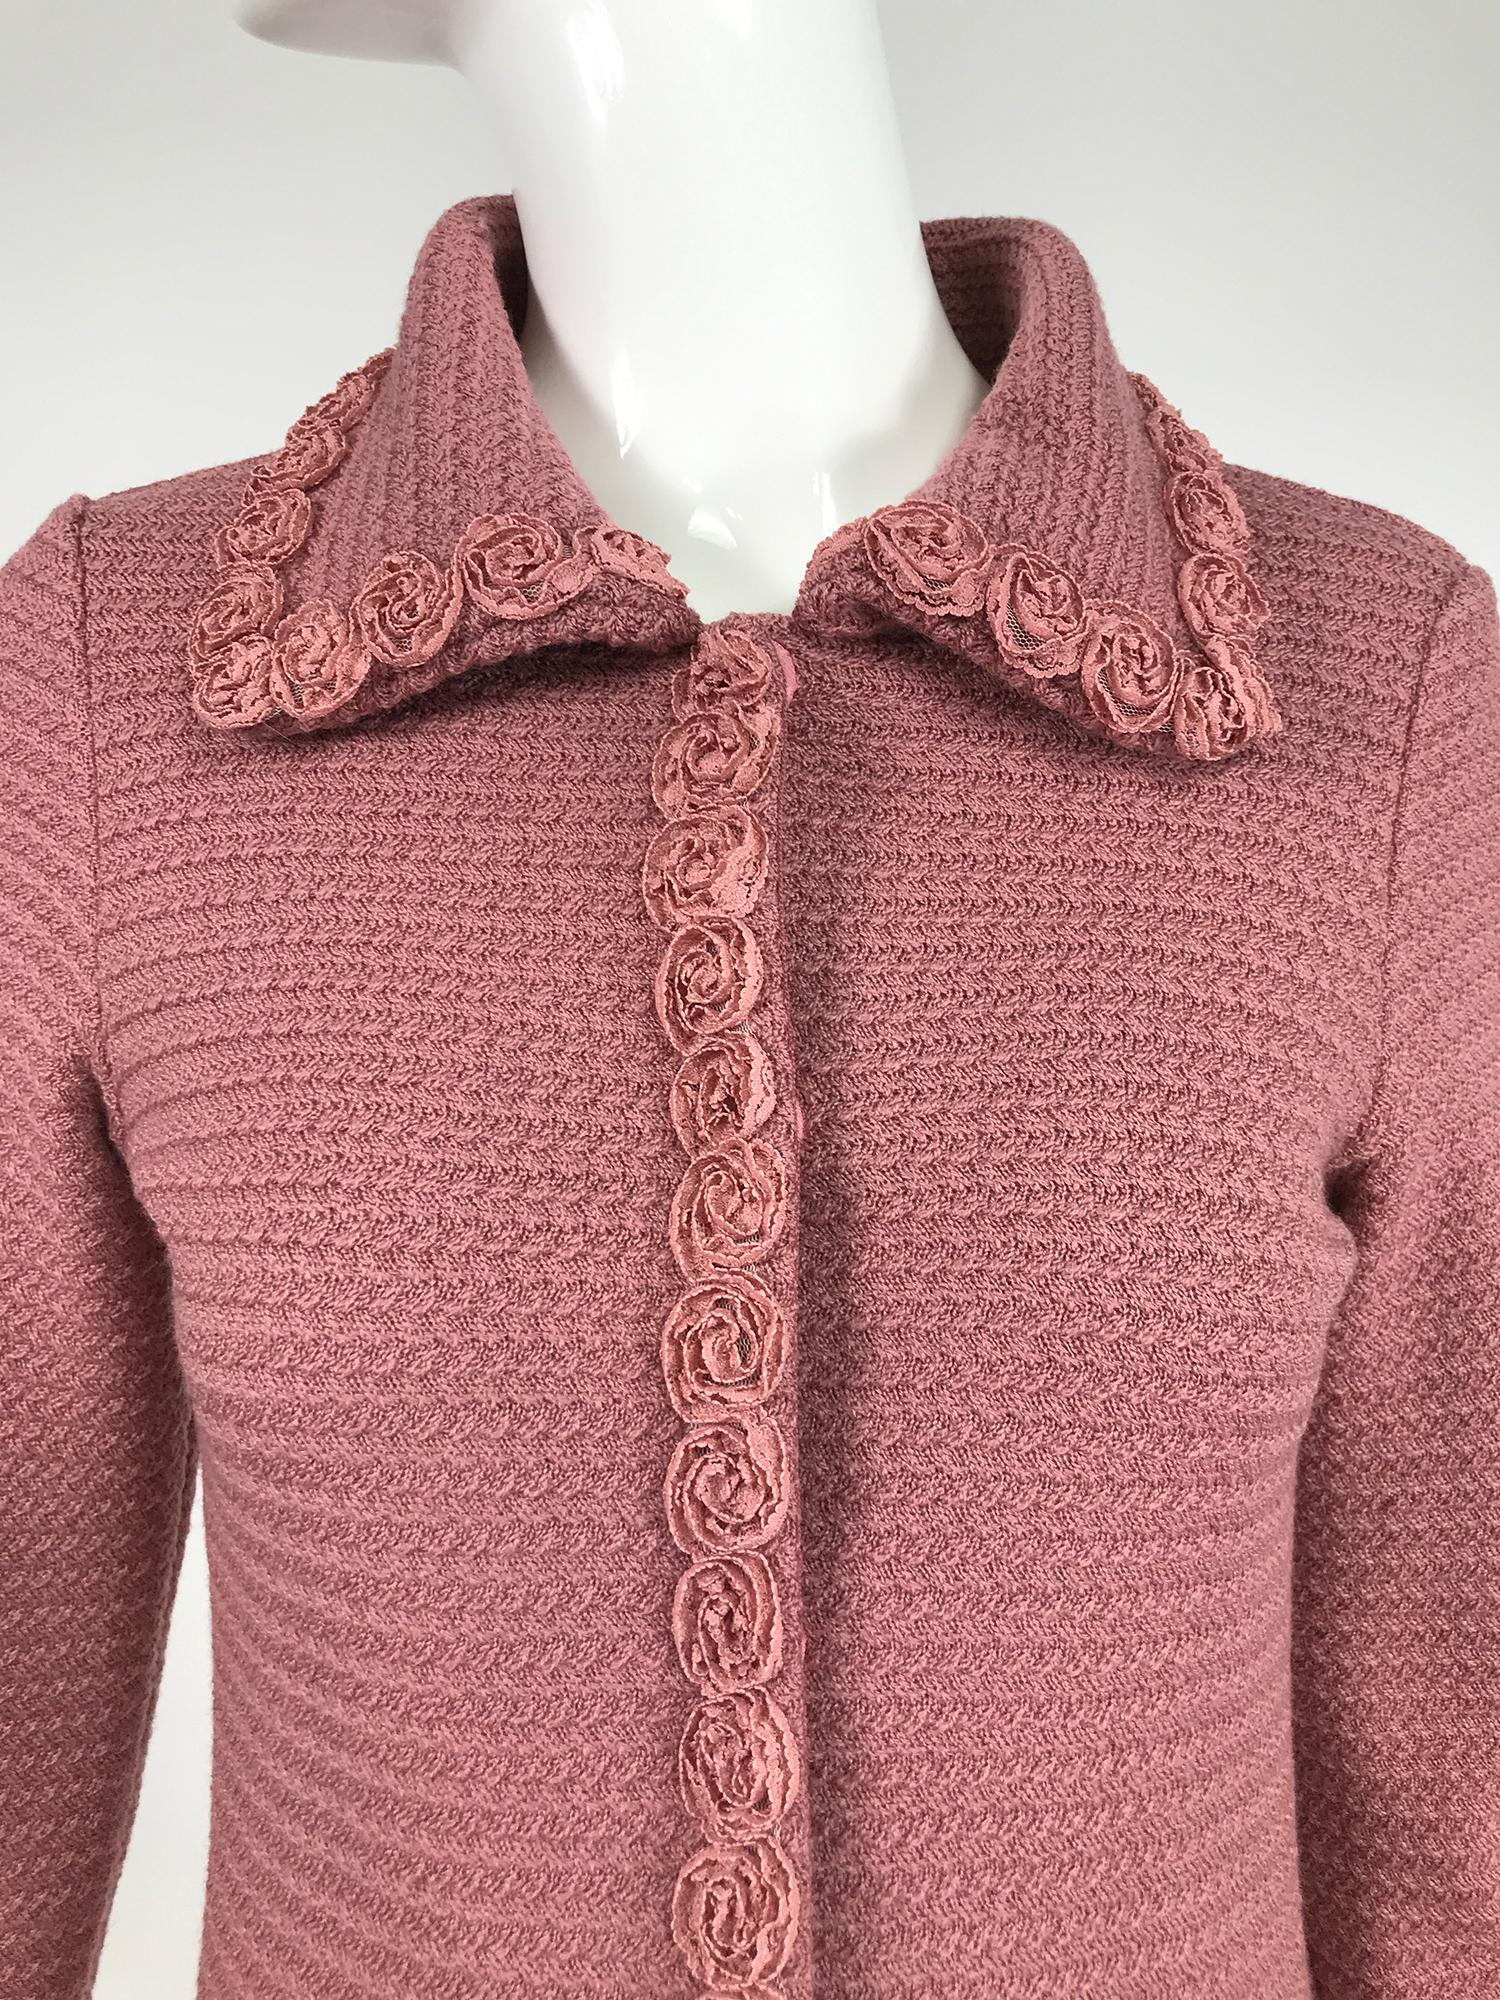 Moschino Pink Wool Knit Coat with Rosette Lace Trims 7